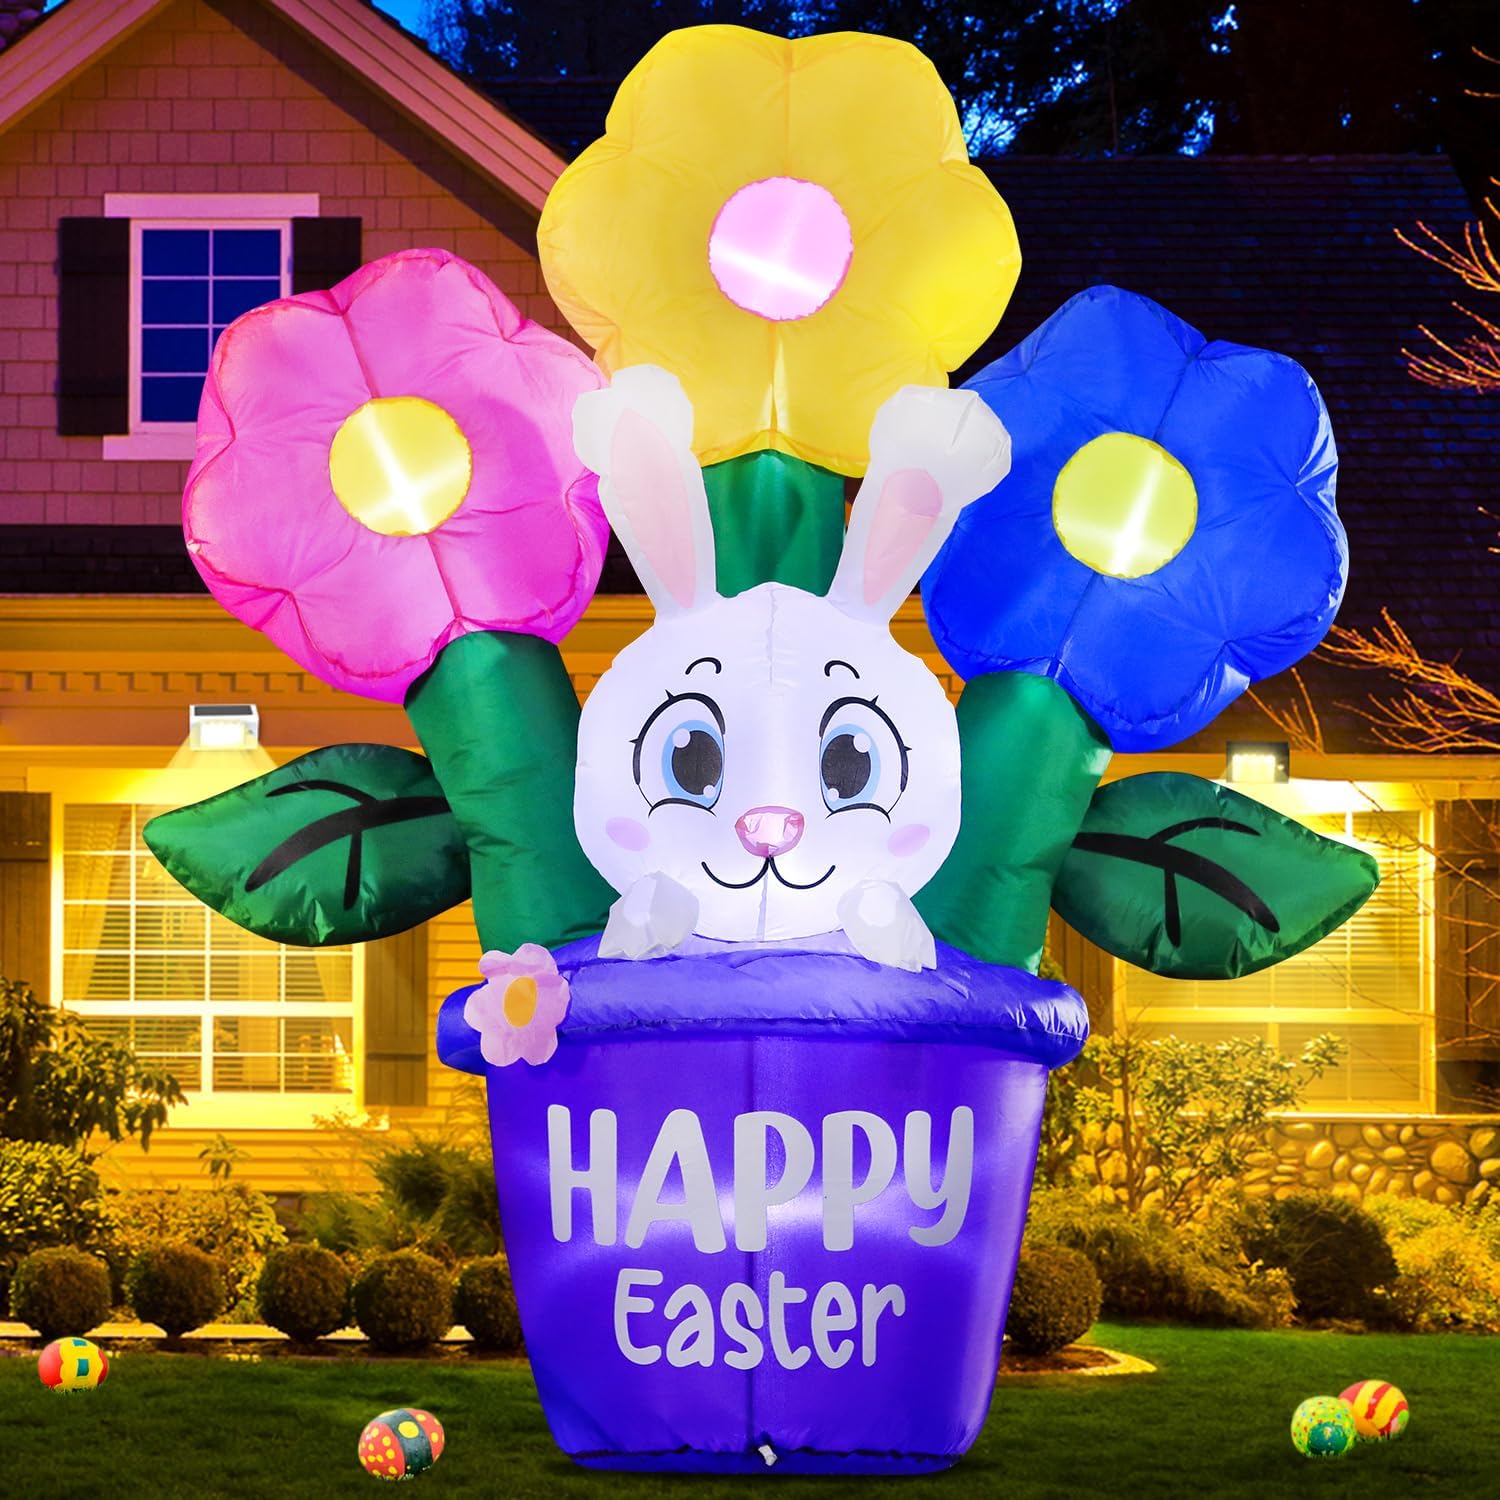 2024 New 5FT Easter Inflatable Bunny Outdoor Decorations with Flower Basket, Build-in LED Lights Holiday Blow Up Yard Decoration, for Easter Holiday Party, Outdoor,Garden, Yard Lawn Dcor